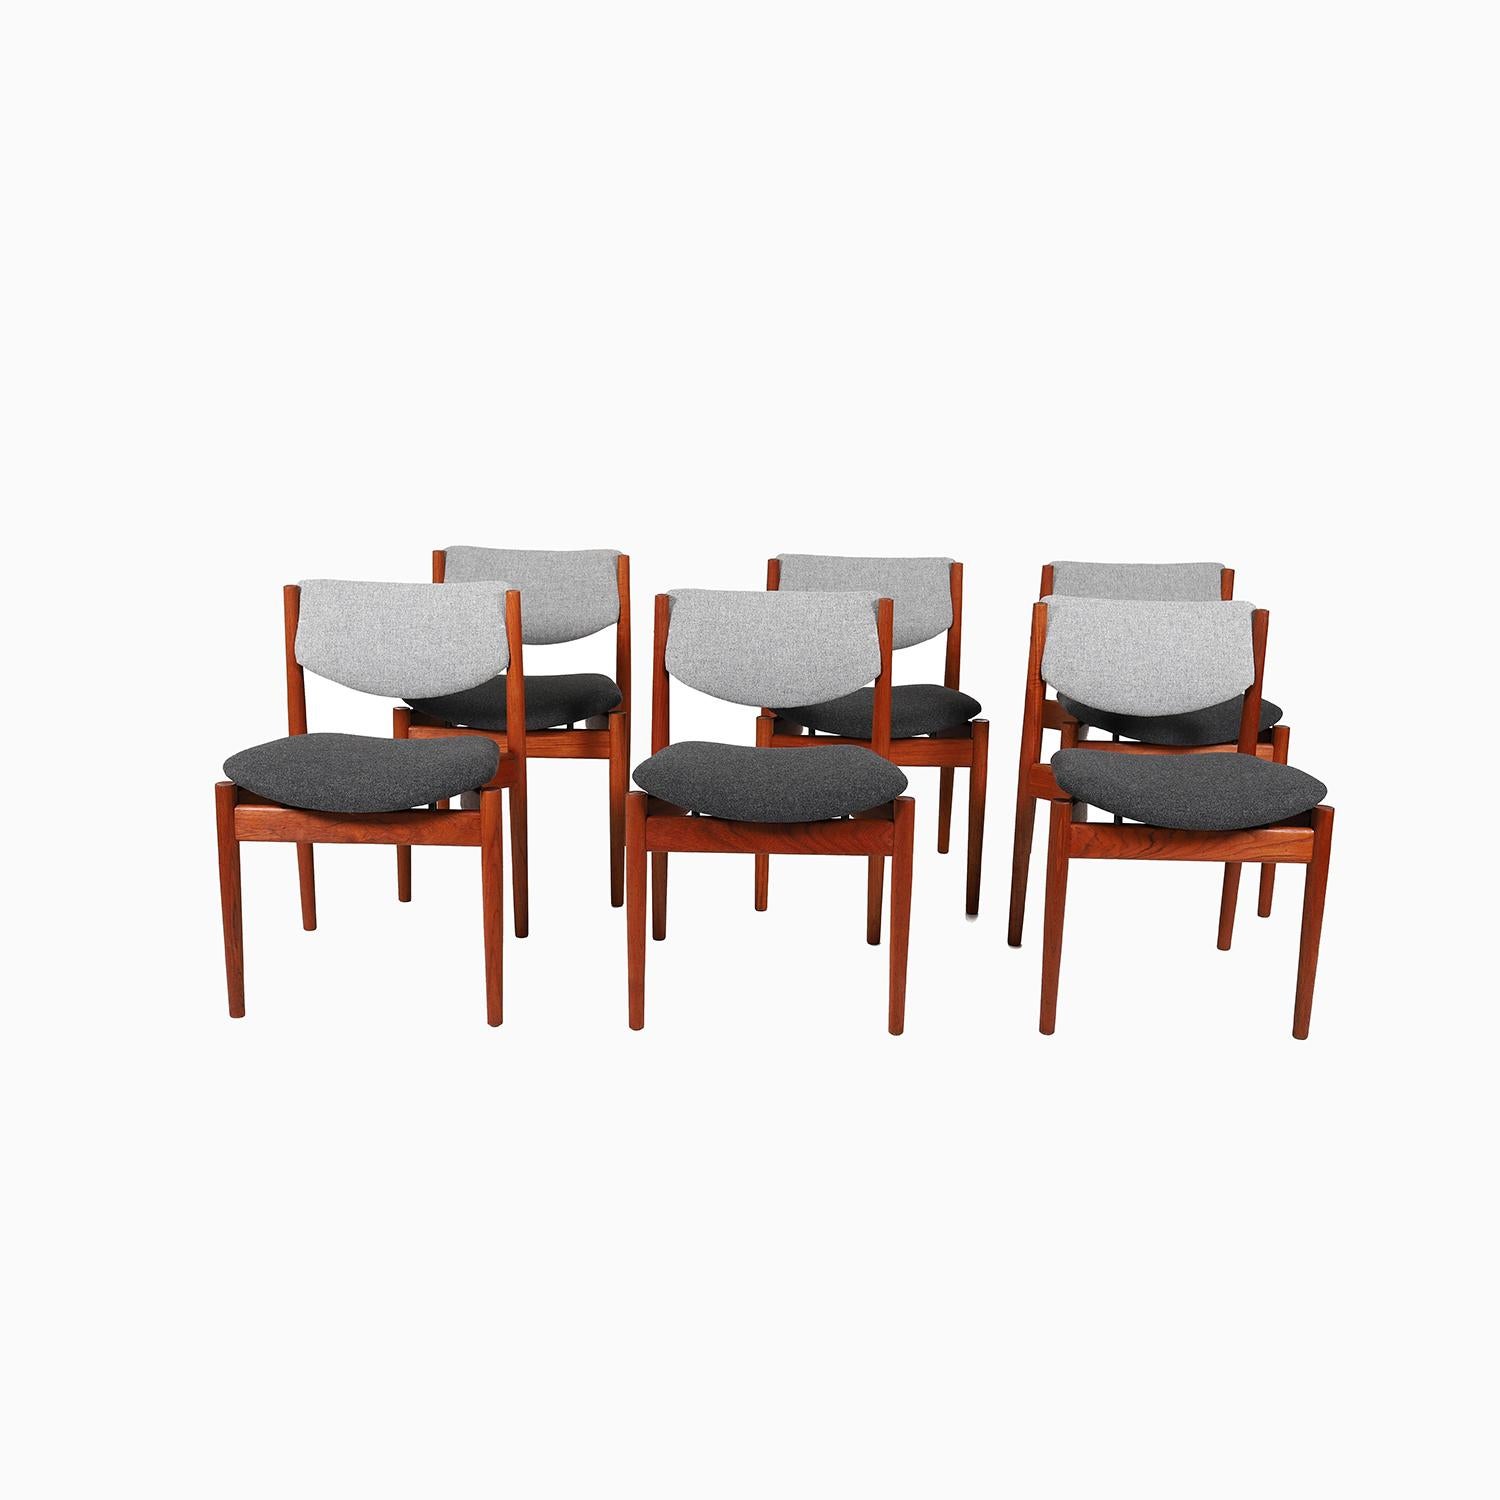 A set of six vintage original Scandinavian Modern Classic dining chairs designed by Finn Juhl for France & Son. Old growth teak frames with turned legs and crescent shaped side rails. Newly upholstered in a two toned Kvadrat 